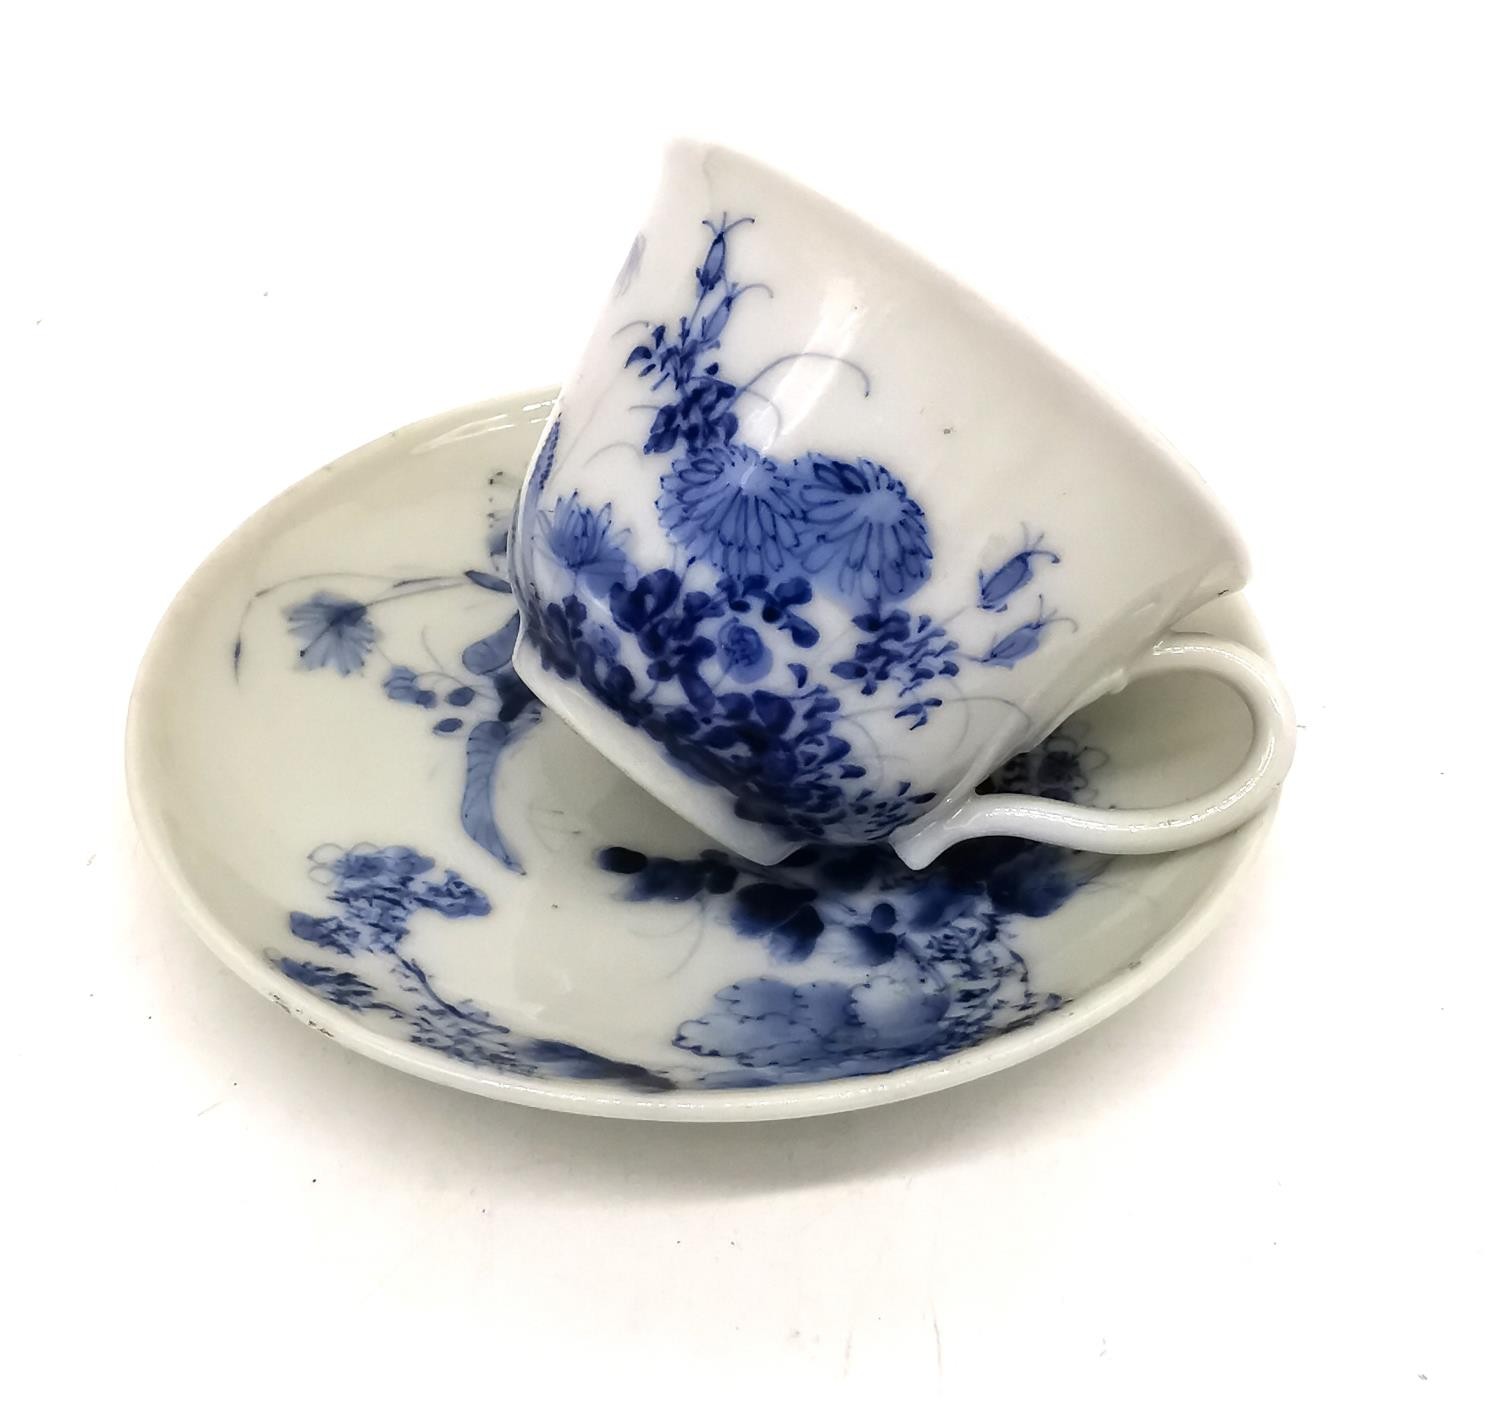 A Japanese 19th century hand painted porcelain small blue and white floral and foliate design teacup - Image 4 of 9